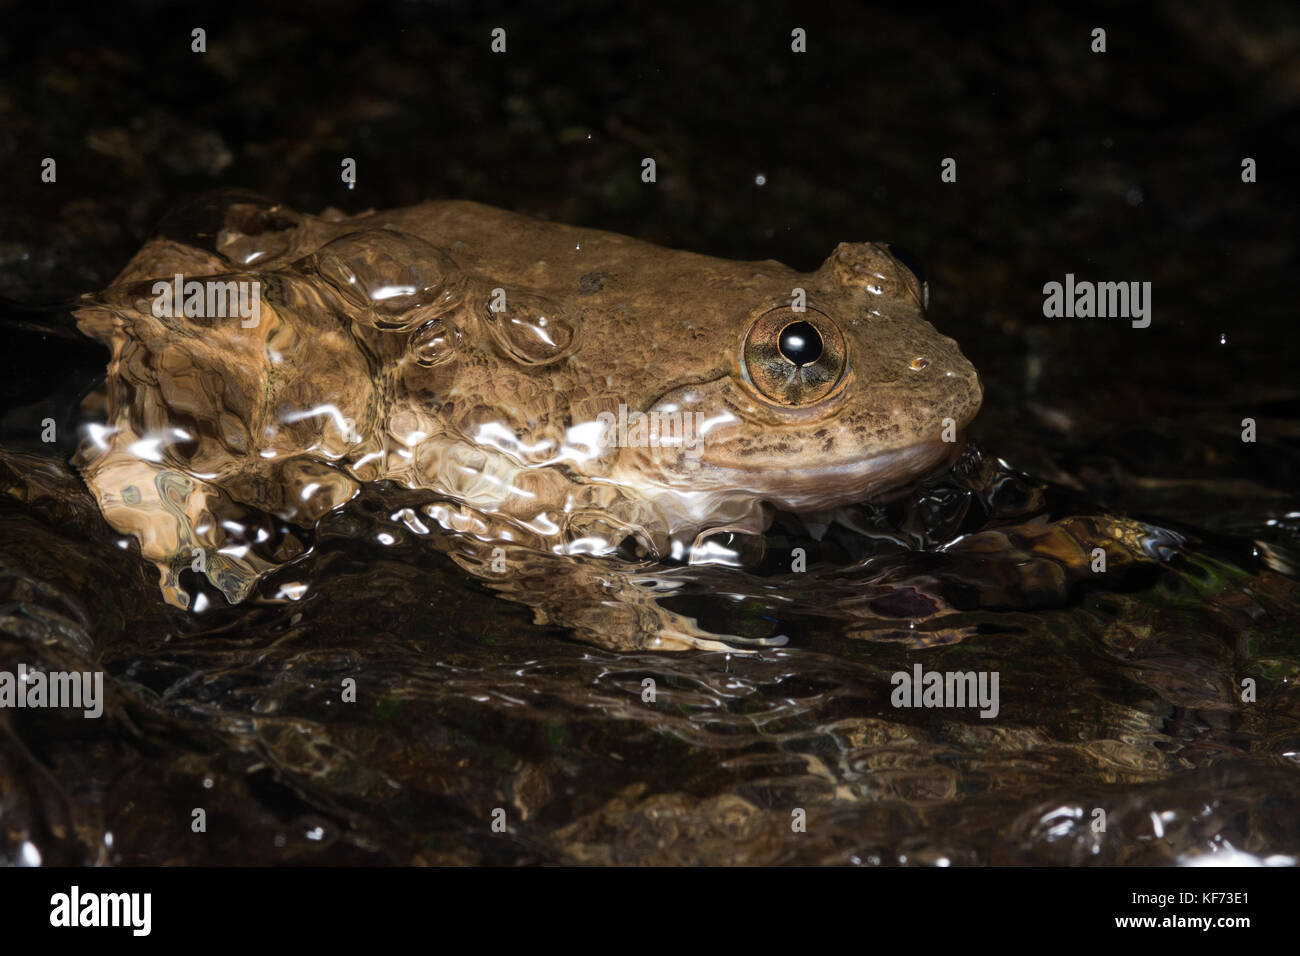 A Limnonectes species frog sits a stream as water flows past it. Stock Photo